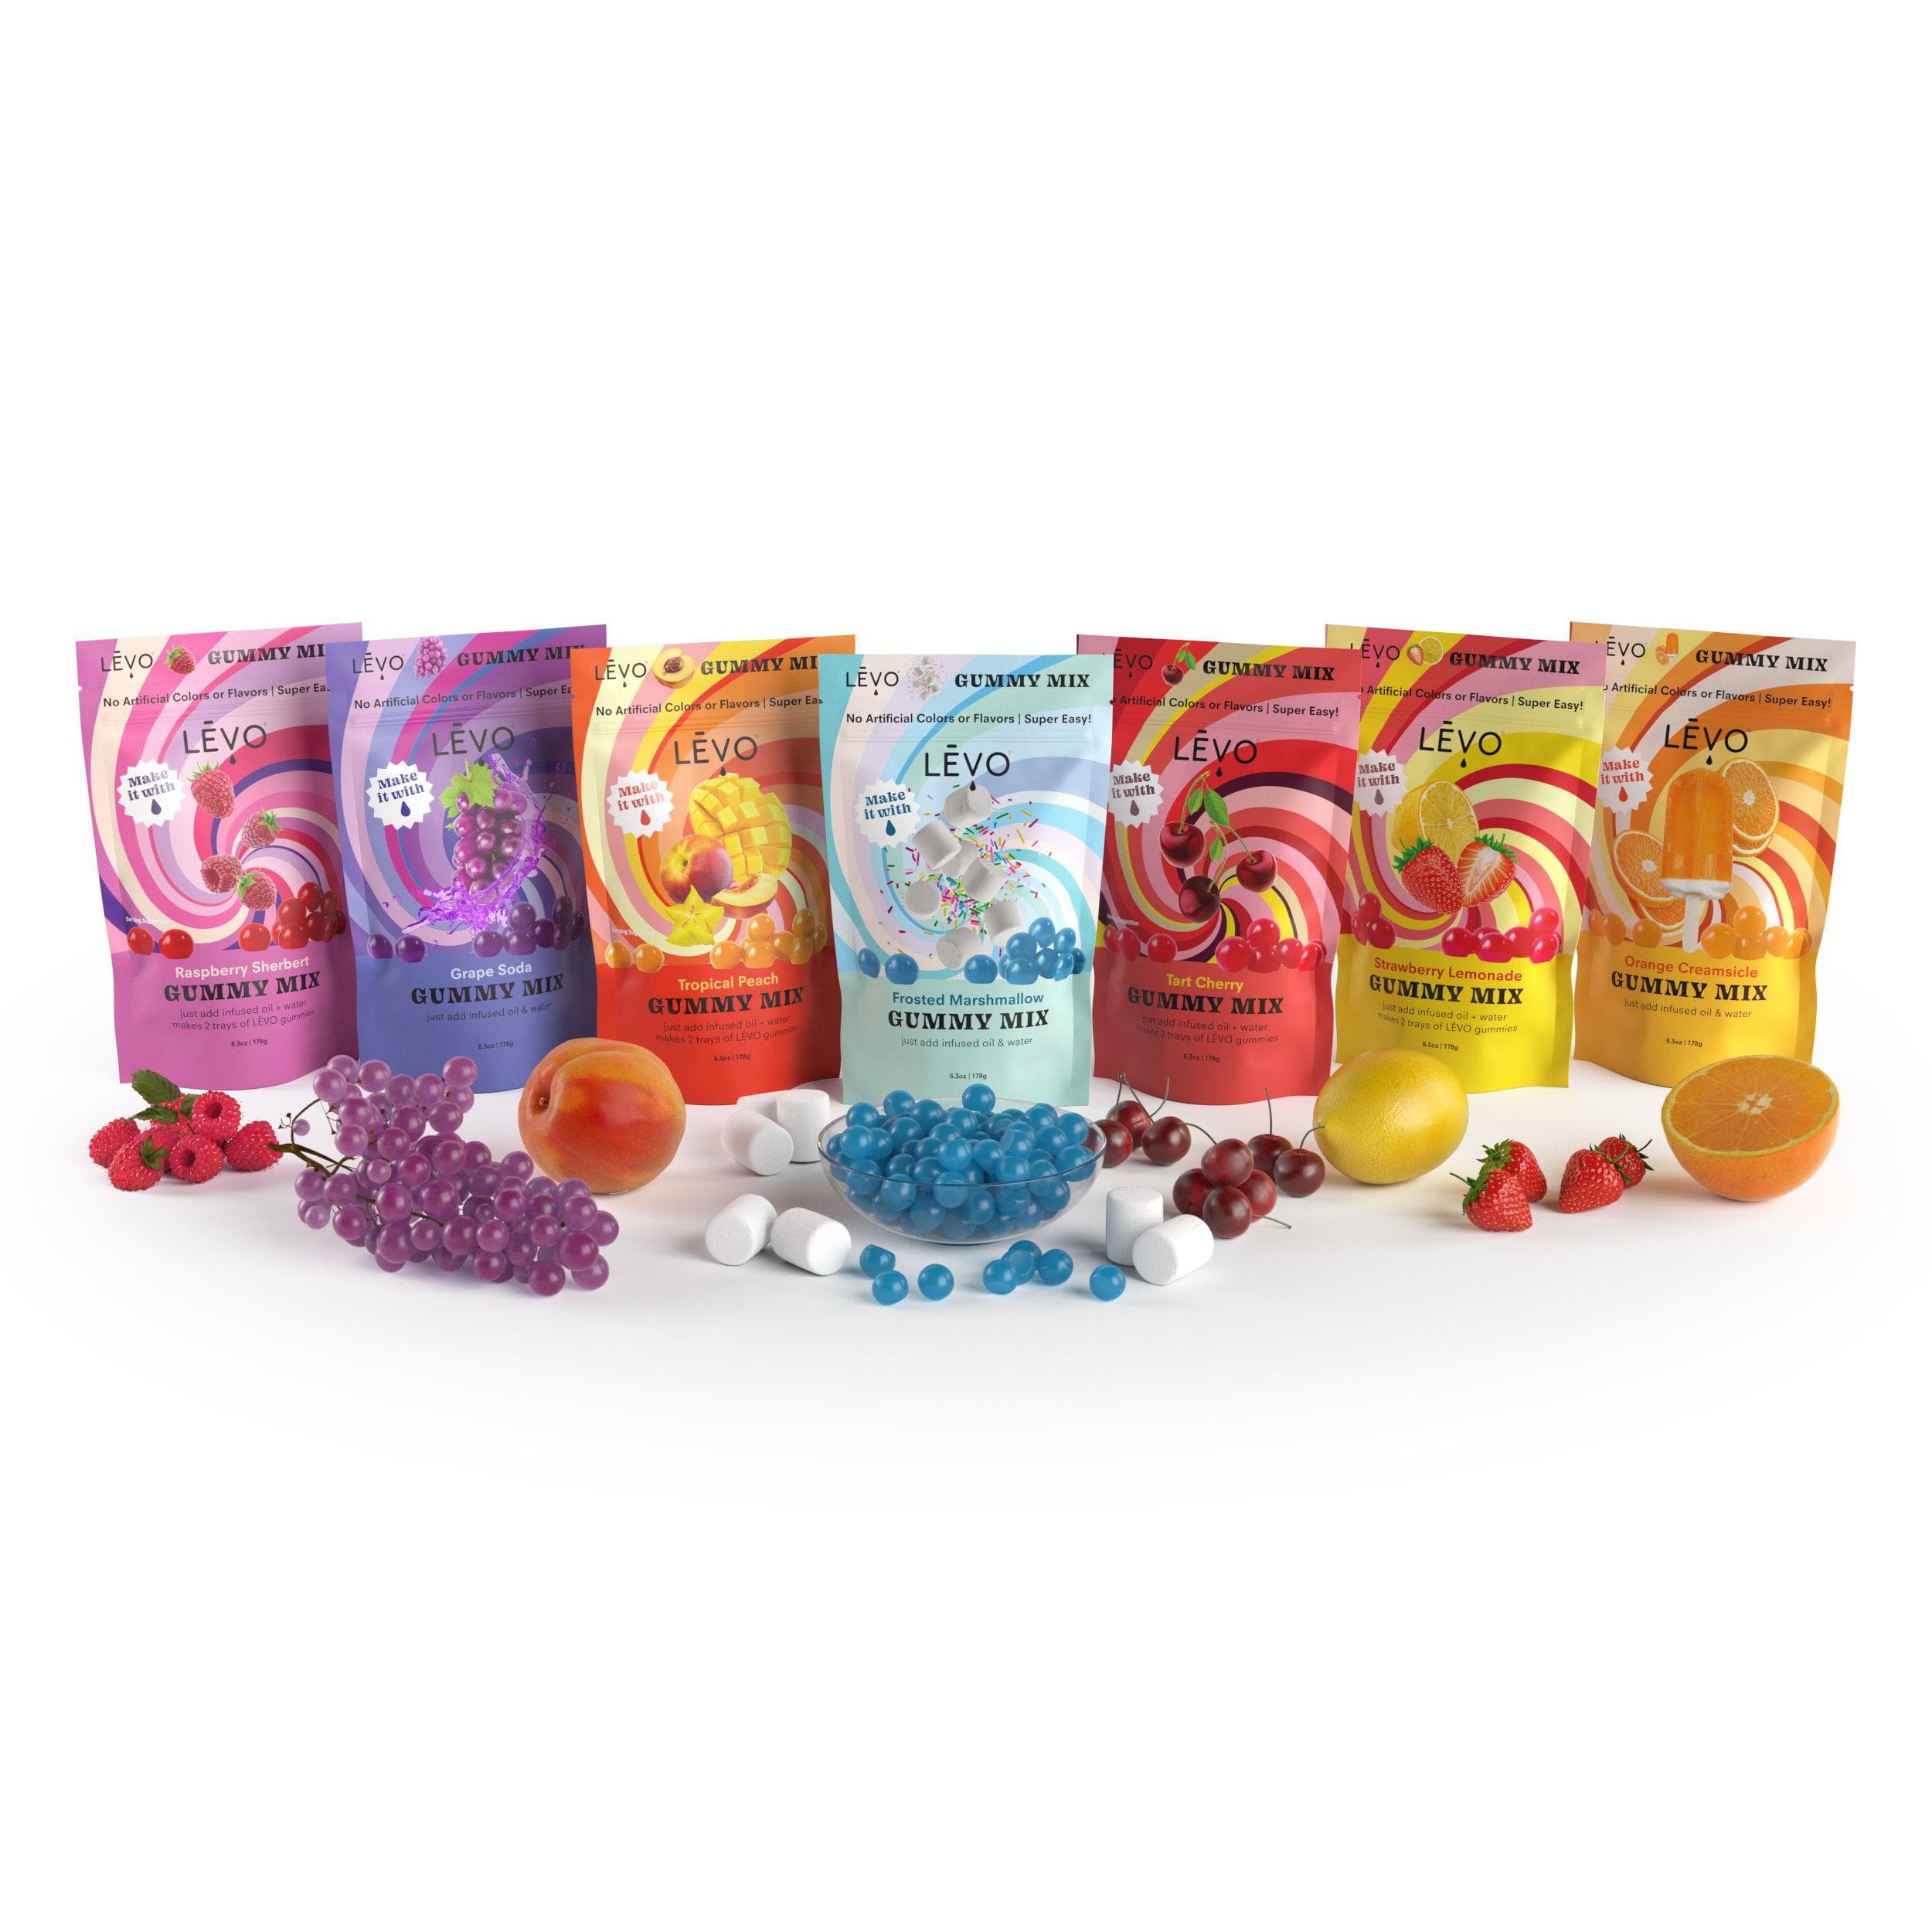 LEVO Gummy Mix variety 7 pack. Try all 7 flavors.